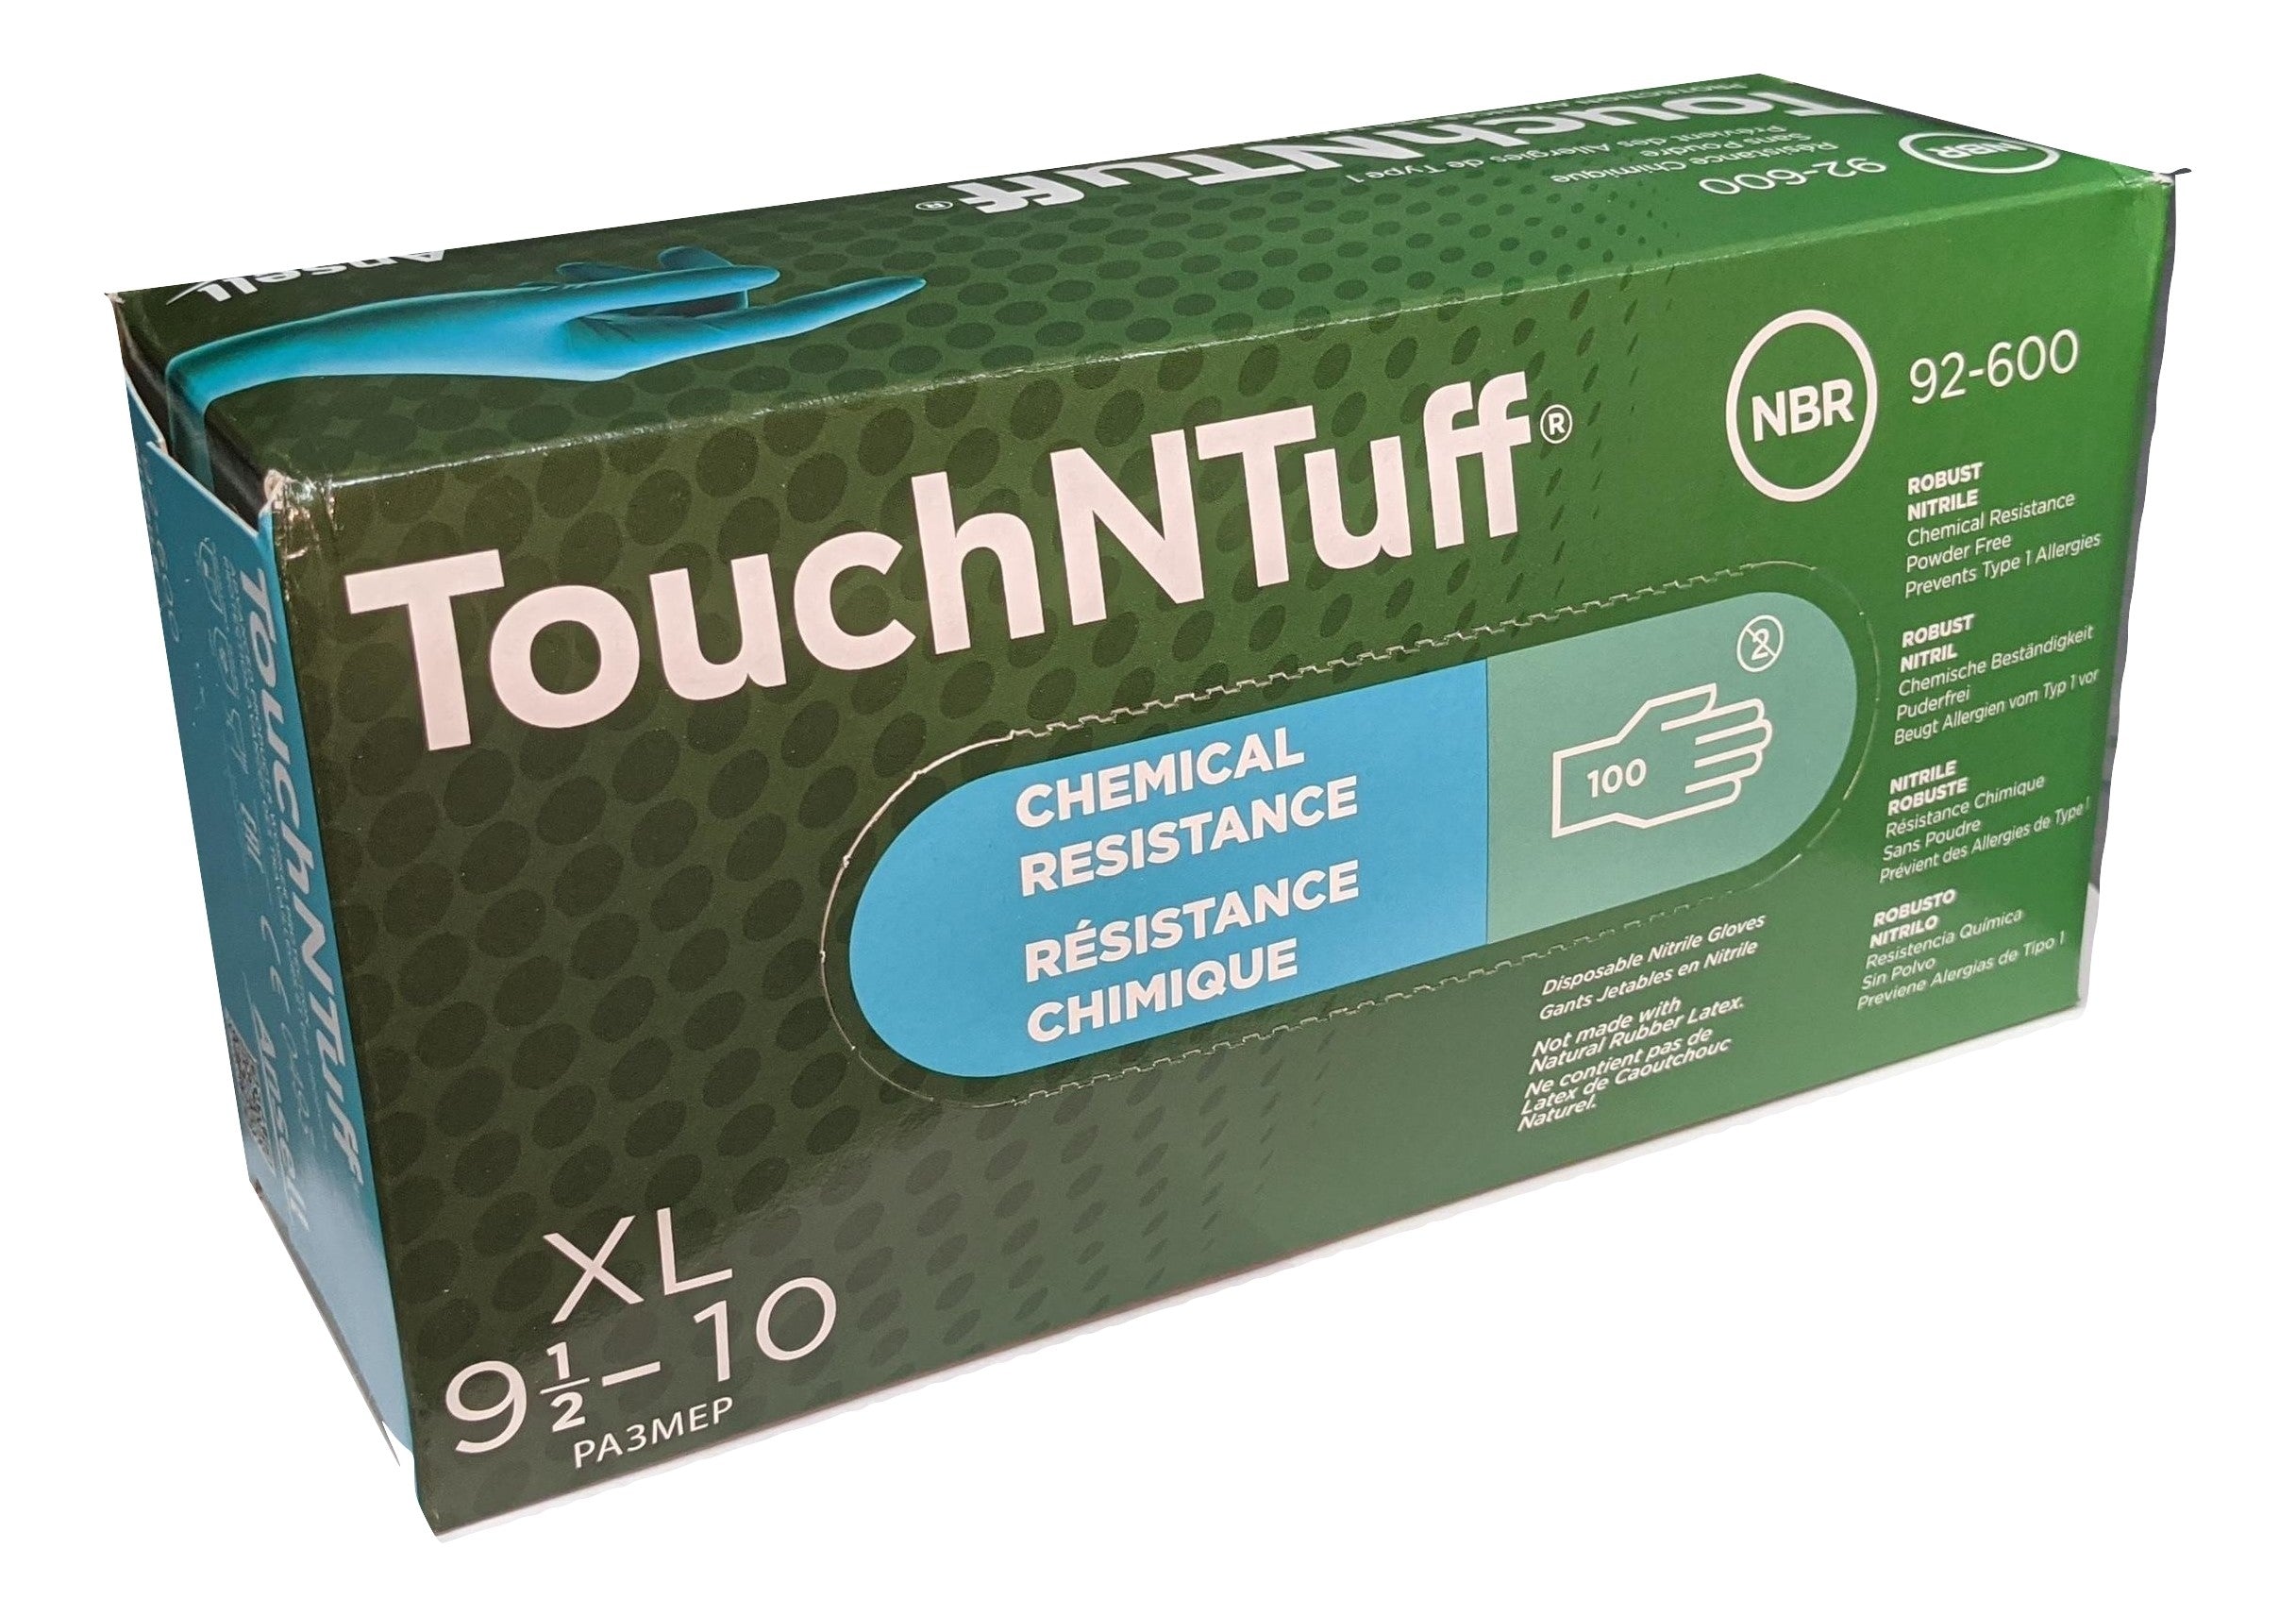 ANSELL TouchNTuff 92-600-XL Chemical Resistant Nitrile powder free disposable gloves, Size XL - Case of 1000 (10 Boxes)